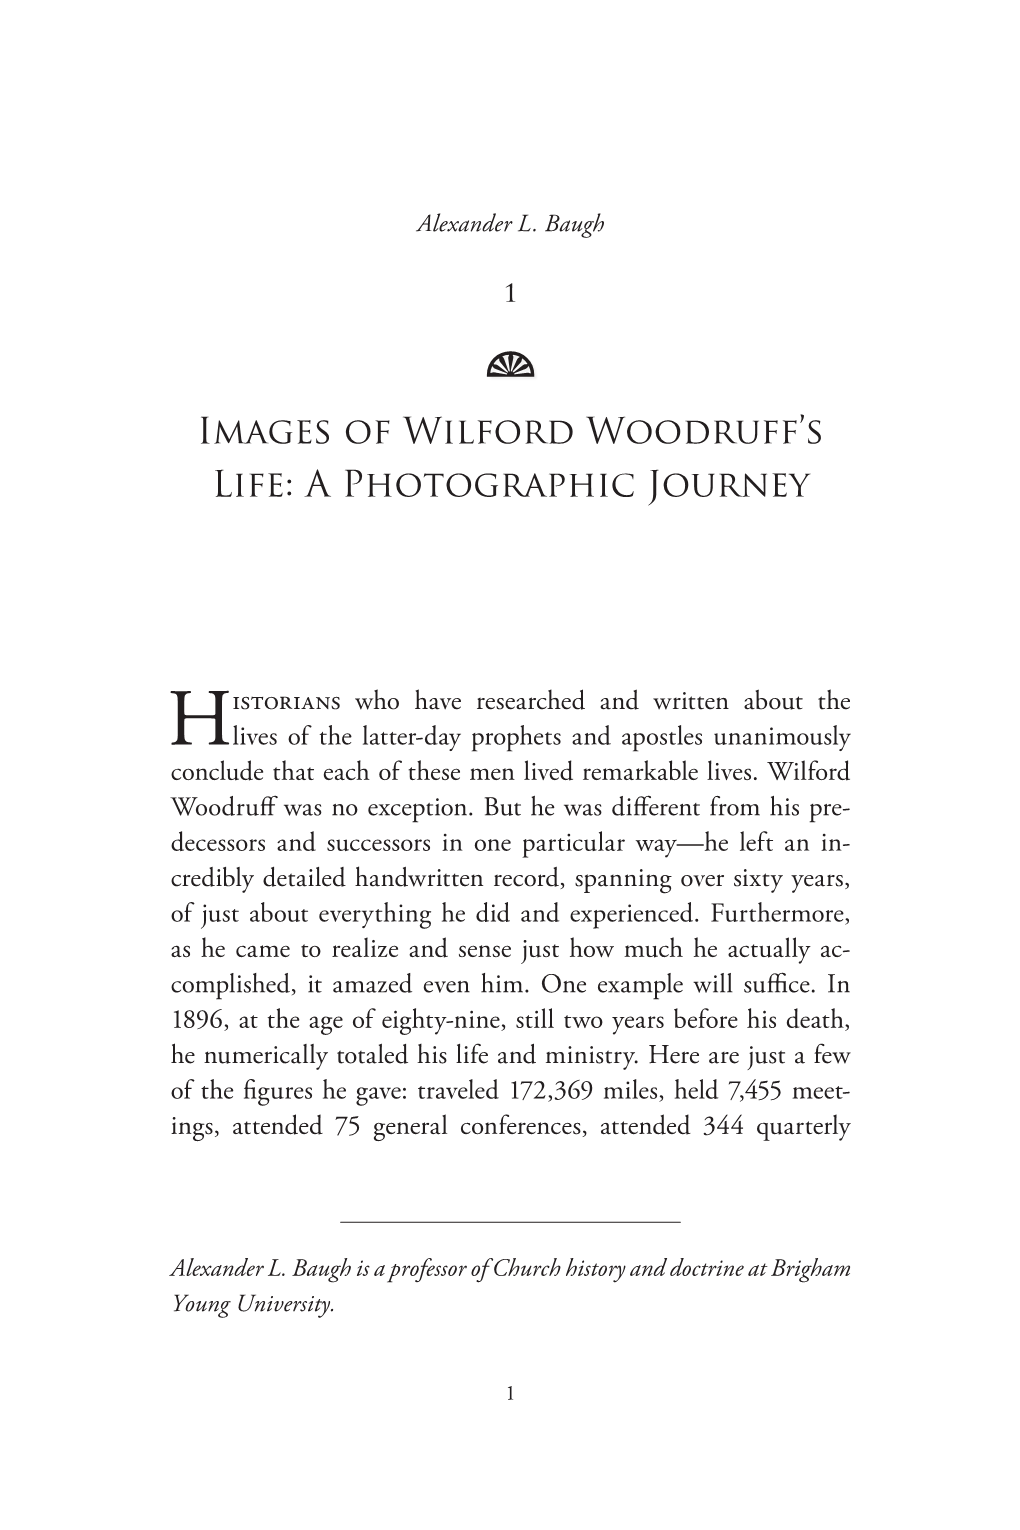 Images of Wilford Woodruff's Life: a Photographic Journey